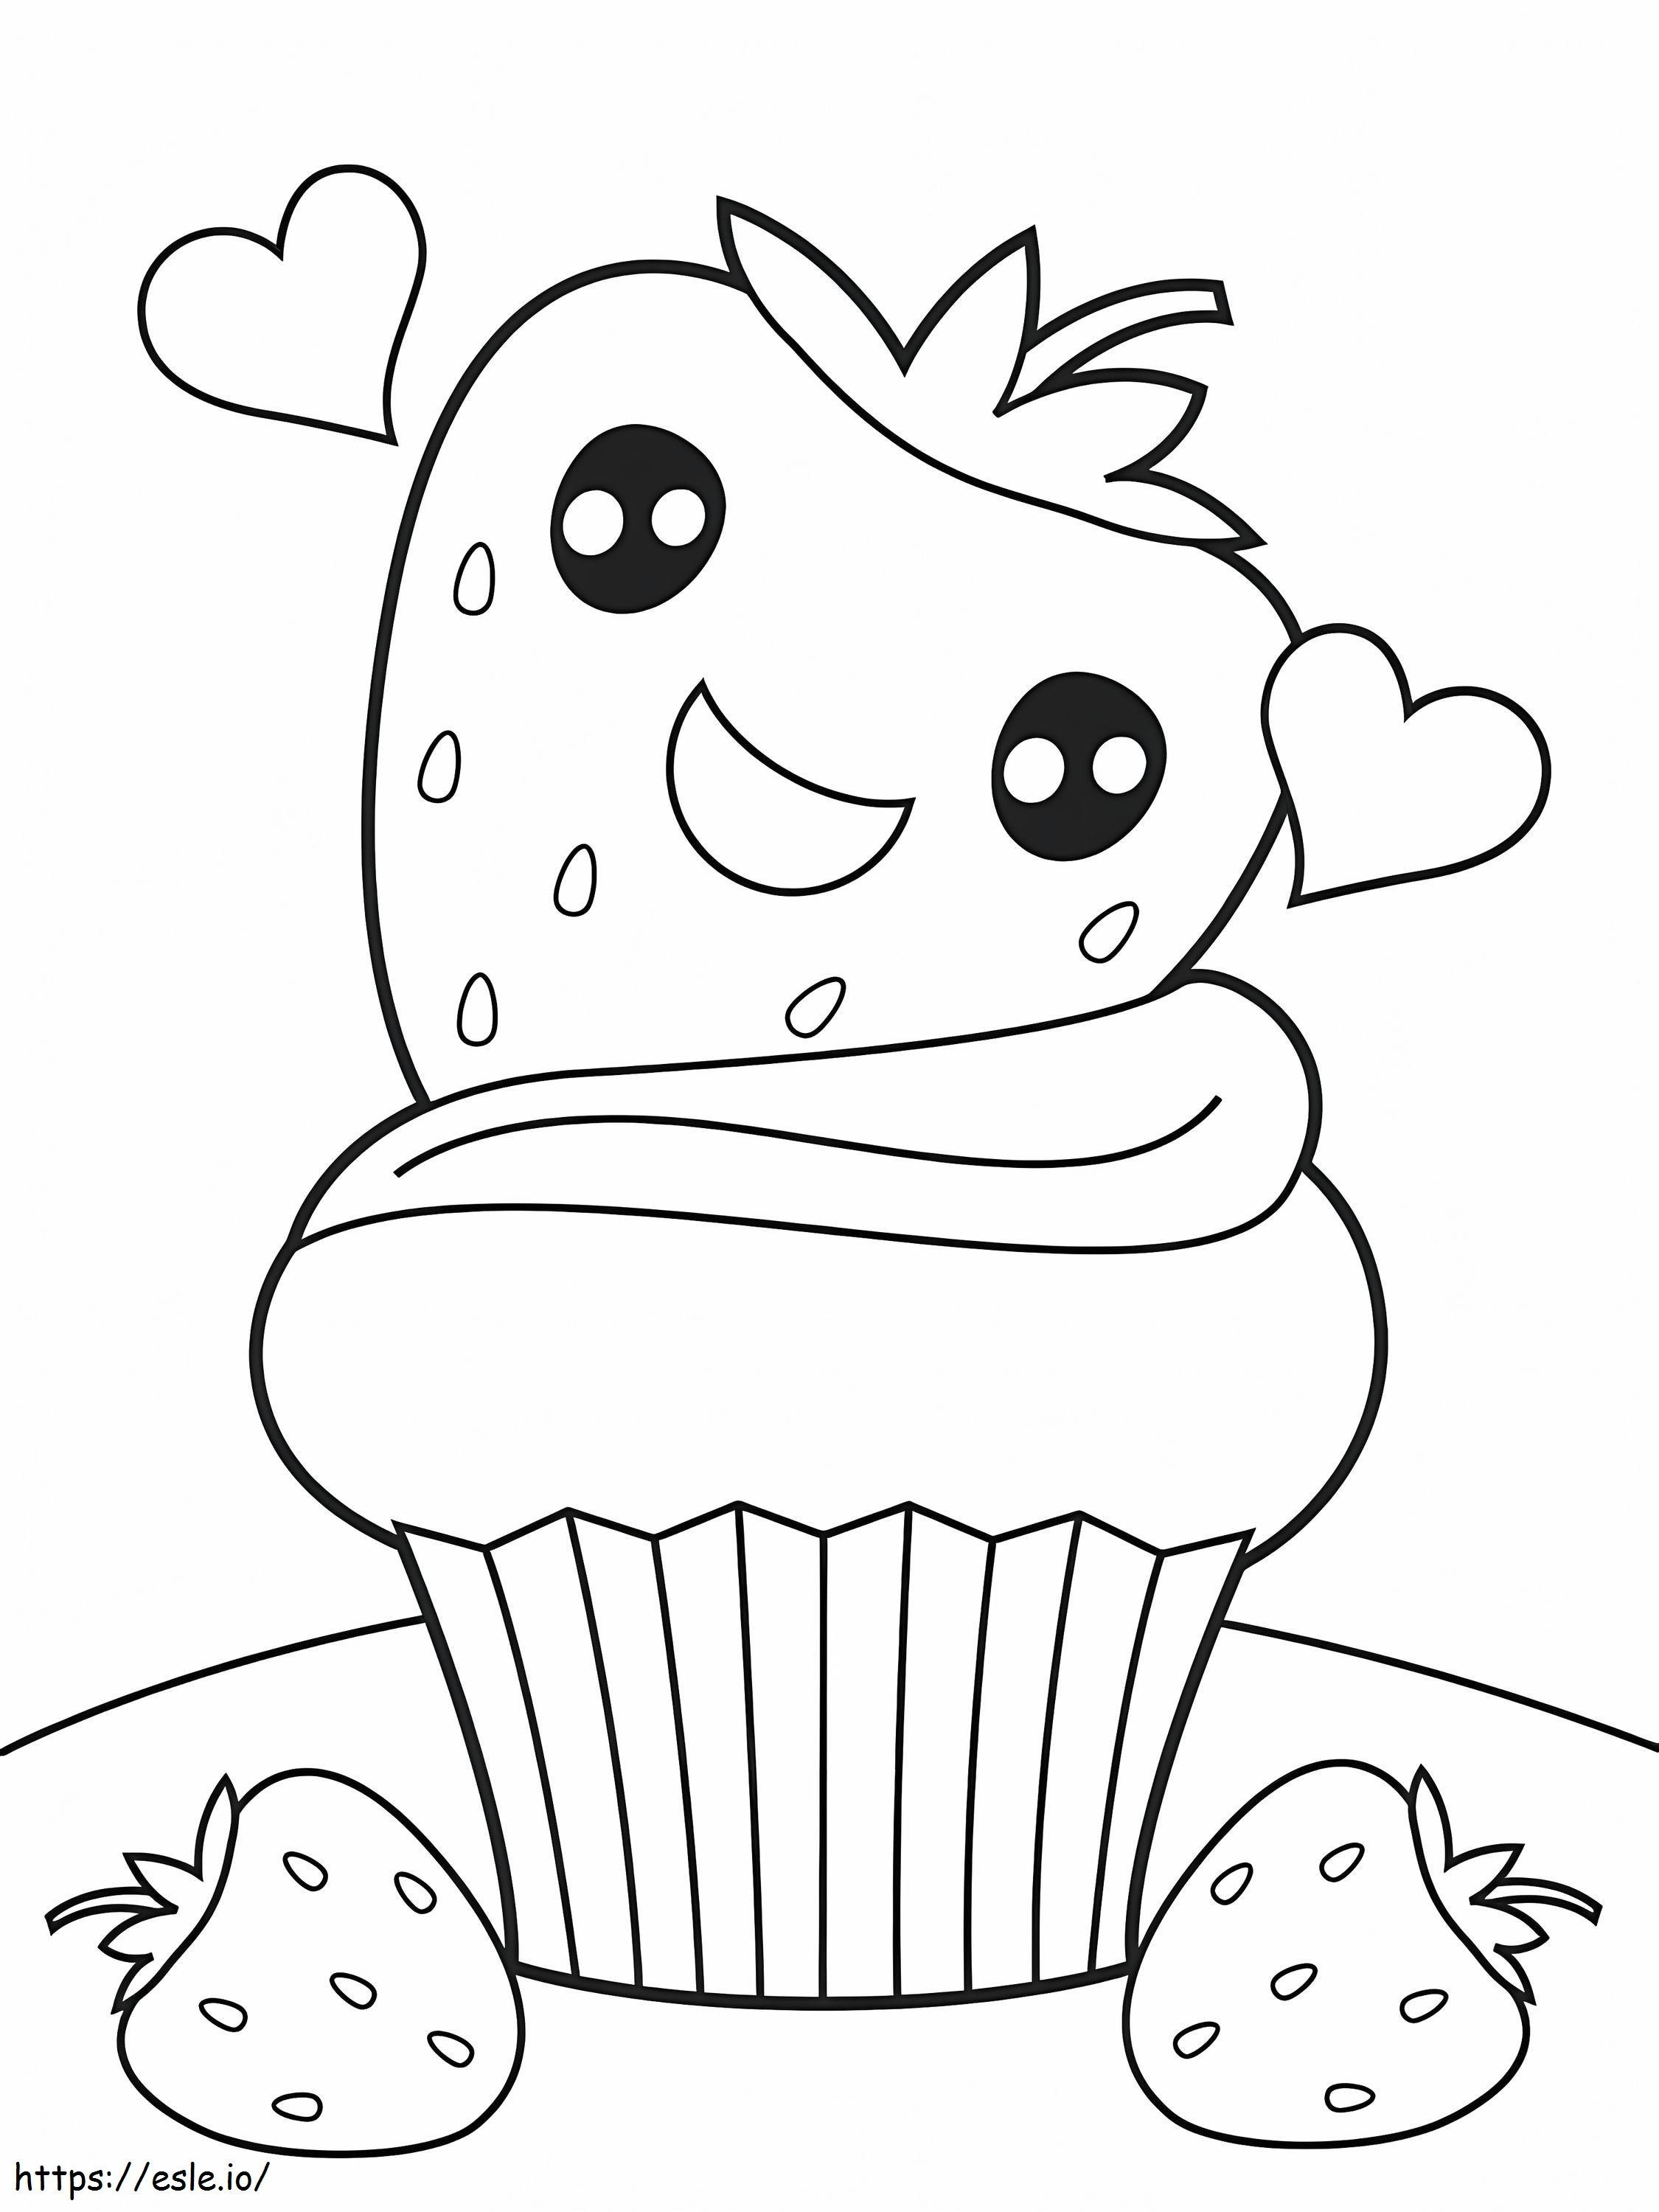 Cute Strawberry Cupcake coloring page